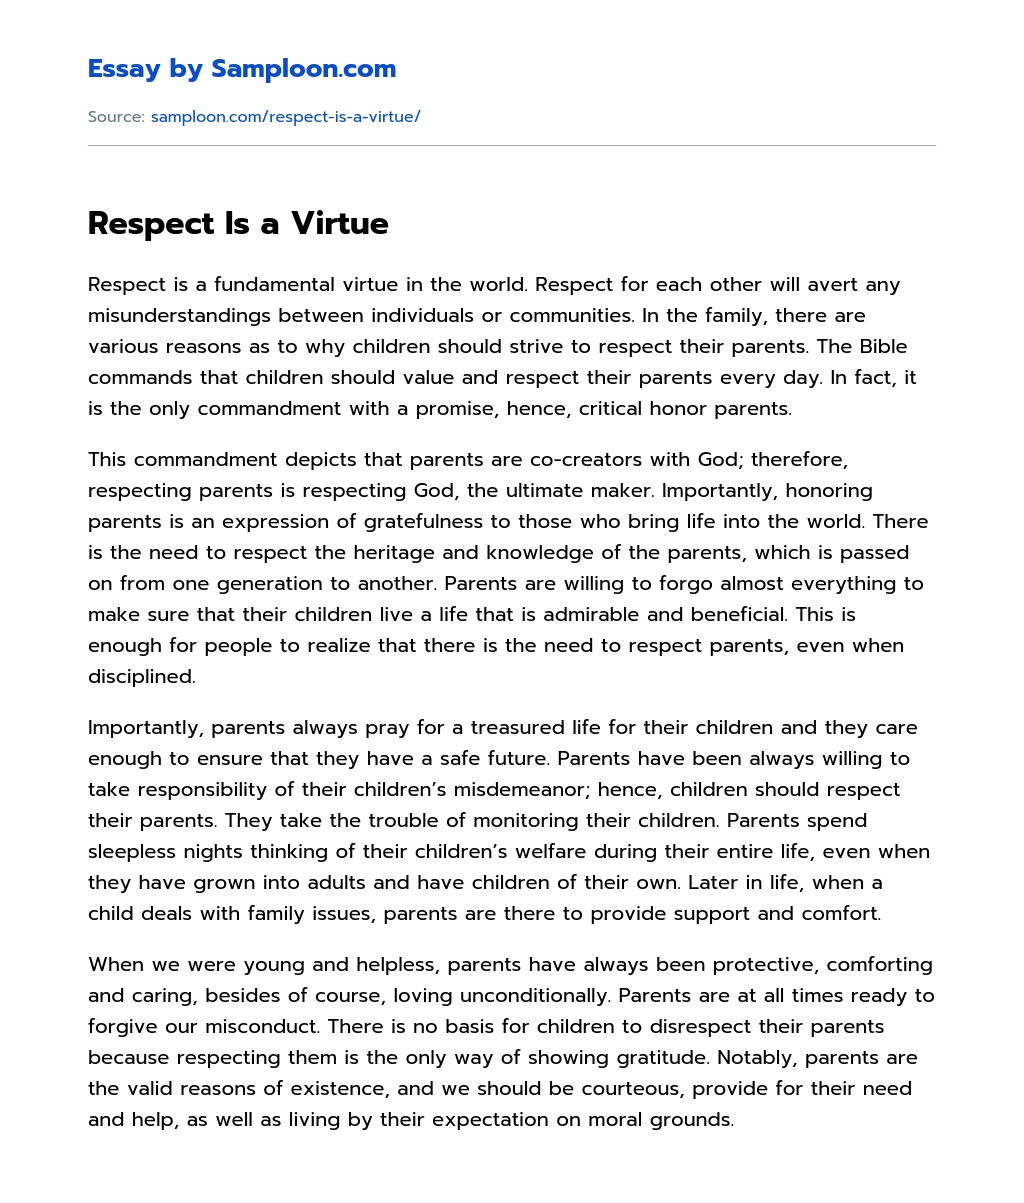 paragraph on respect